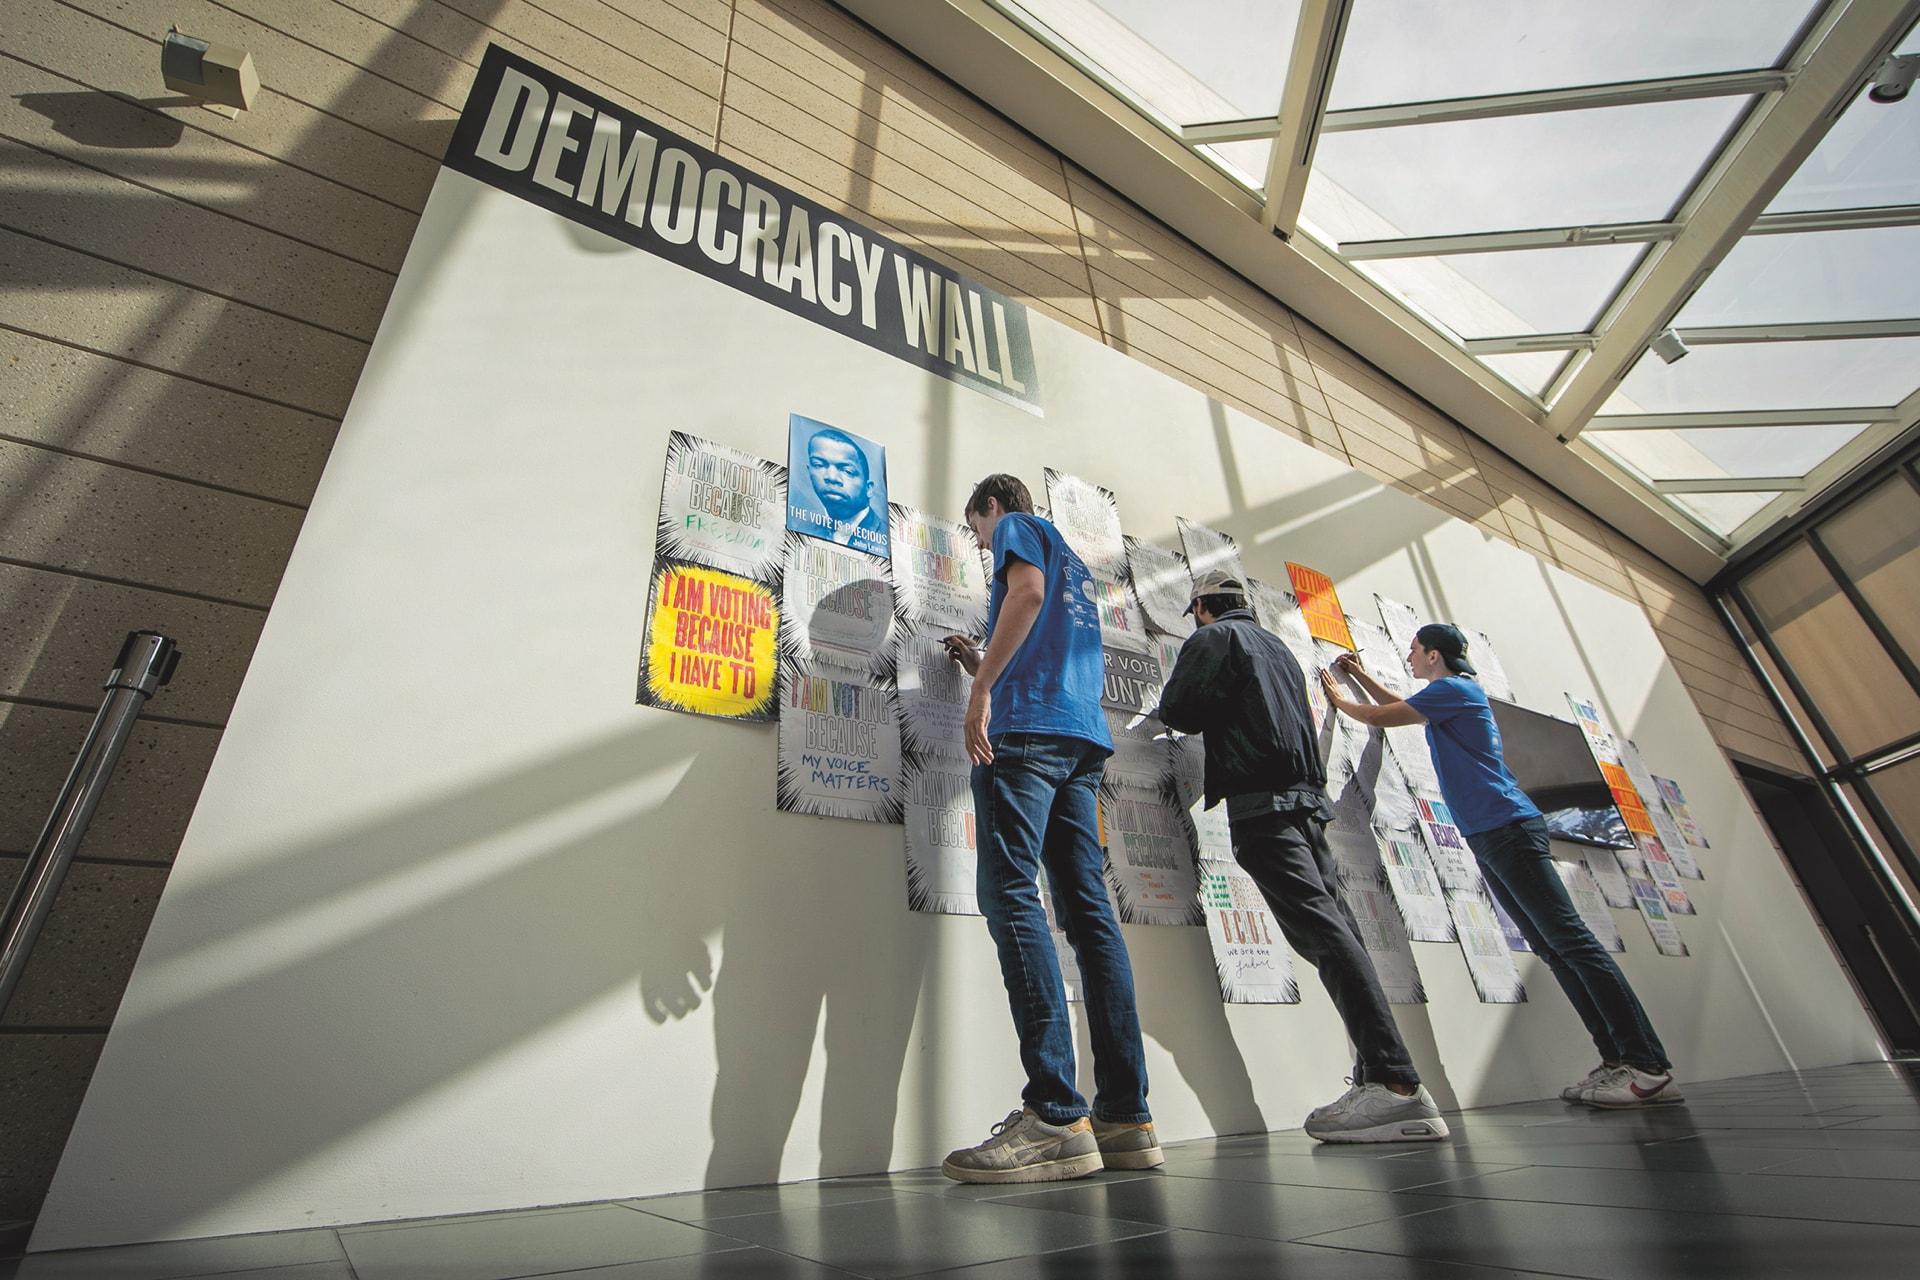 THUMBNAIL: Students add their posters to the Democracy Wall at the Nasher Museum.